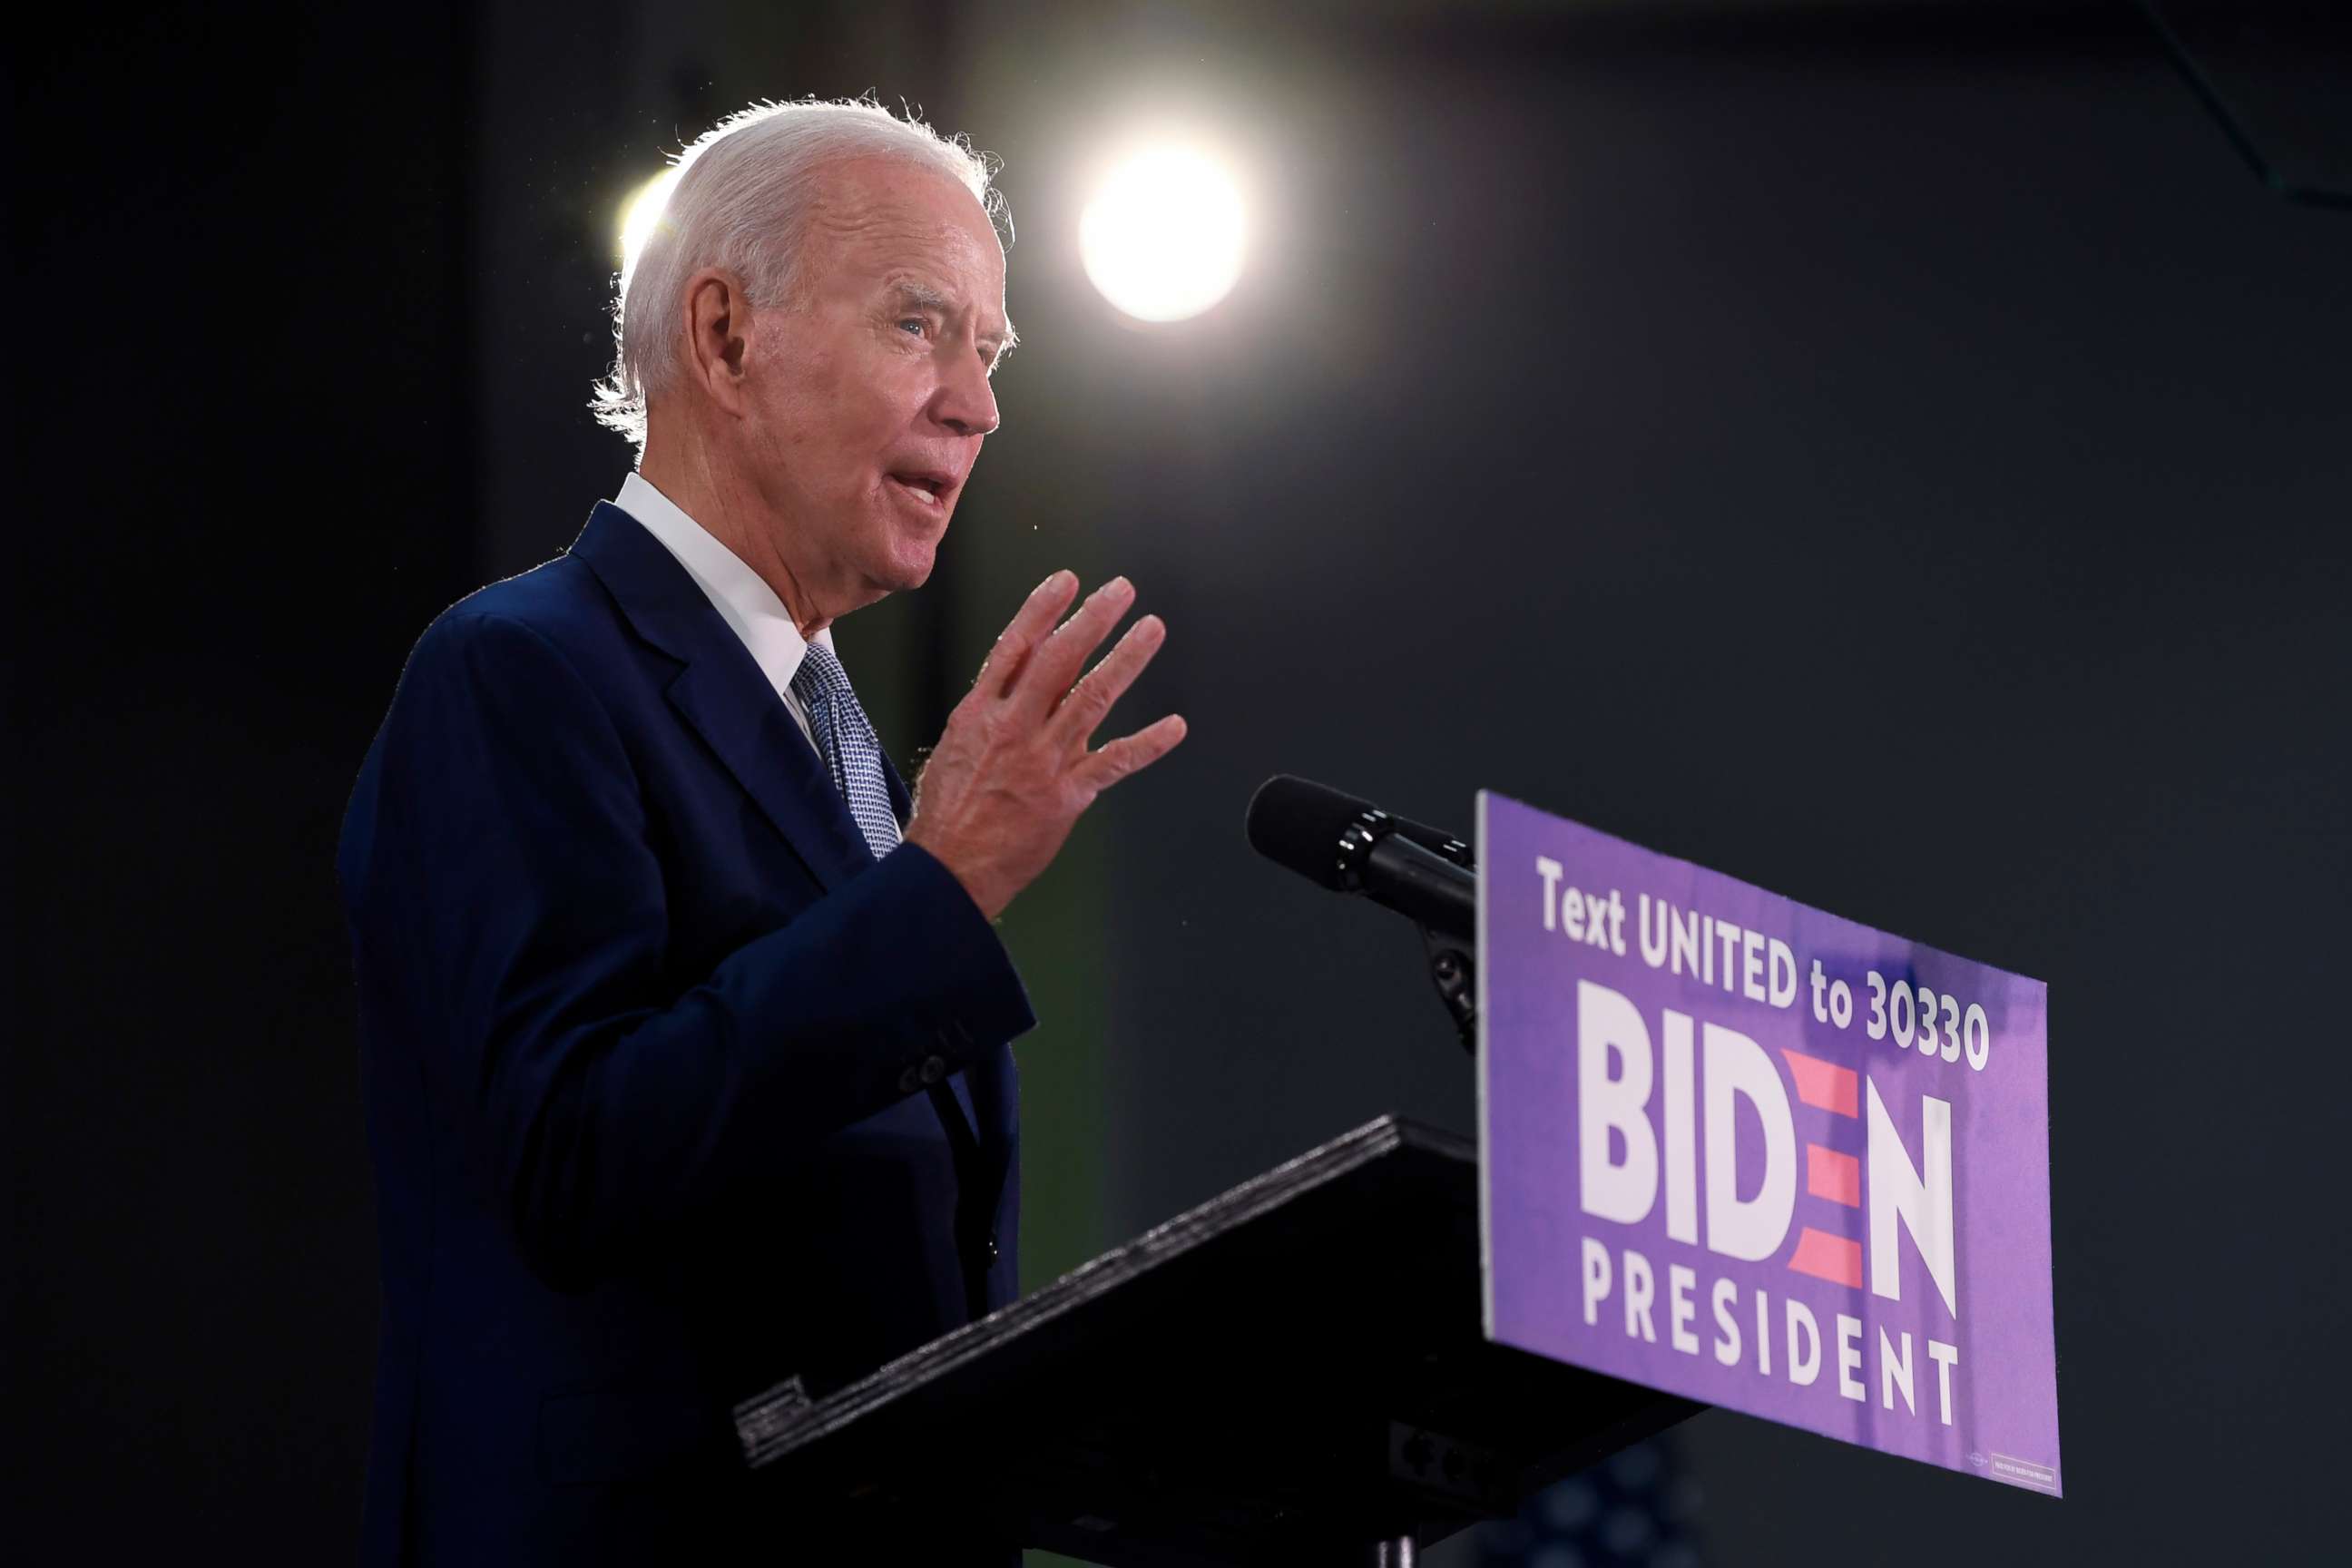 PHOTO: Joe Biden speaks about the economy during an event in Dover, Del., June 5, 2020.